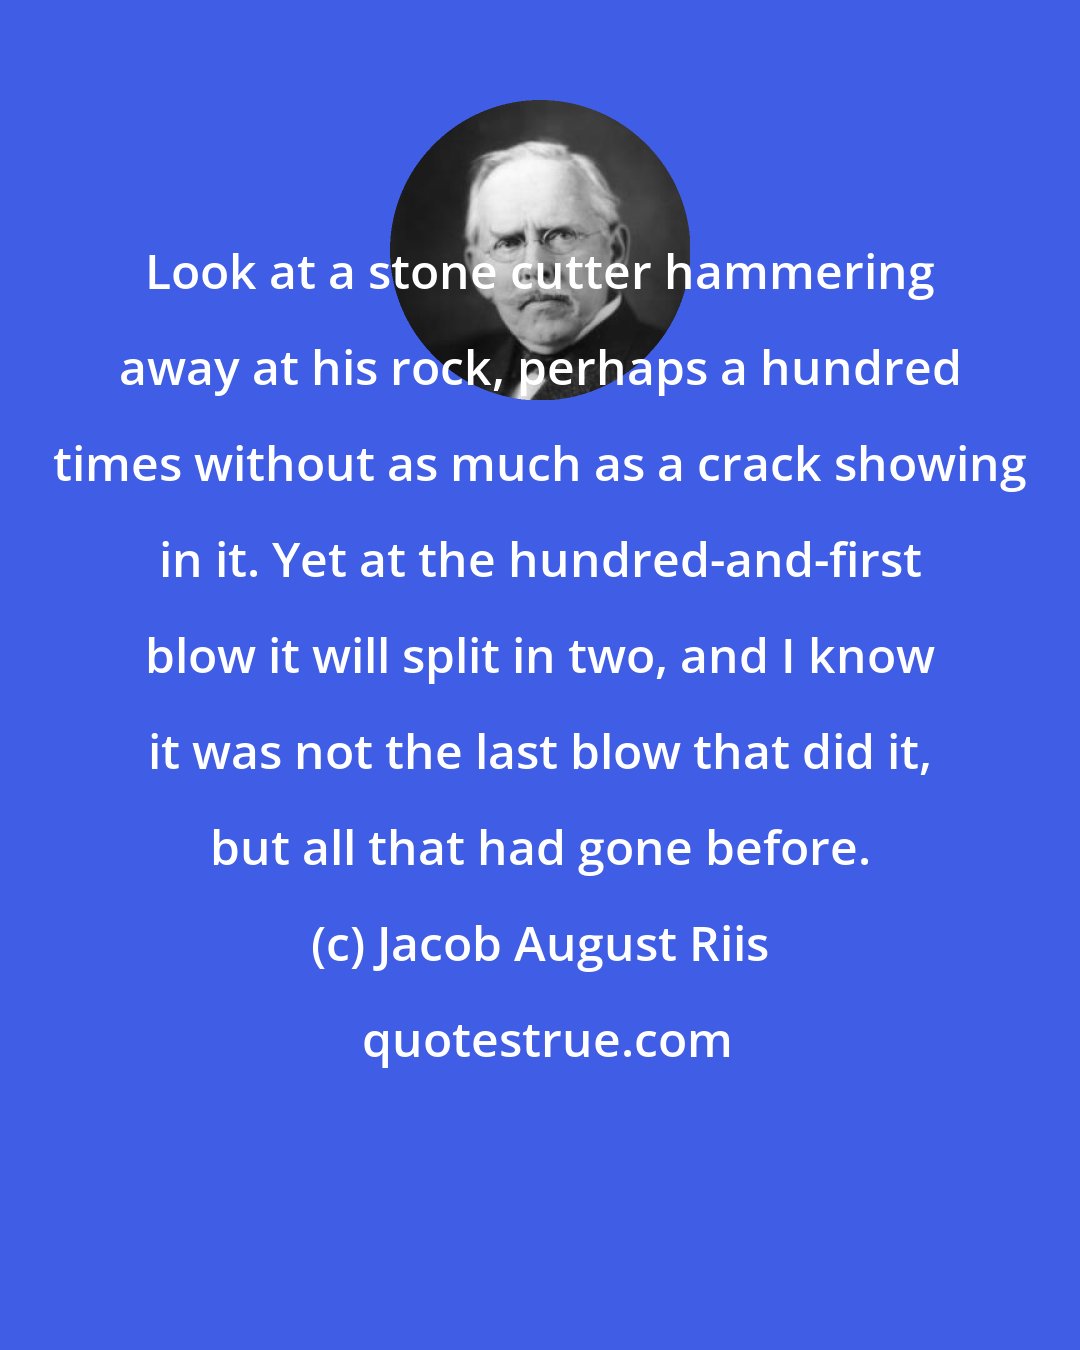 Jacob August Riis: Look at a stone cutter hammering away at his rock, perhaps a hundred times without as much as a crack showing in it. Yet at the hundred-and-first blow it will split in two, and I know it was not the last blow that did it, but all that had gone before.